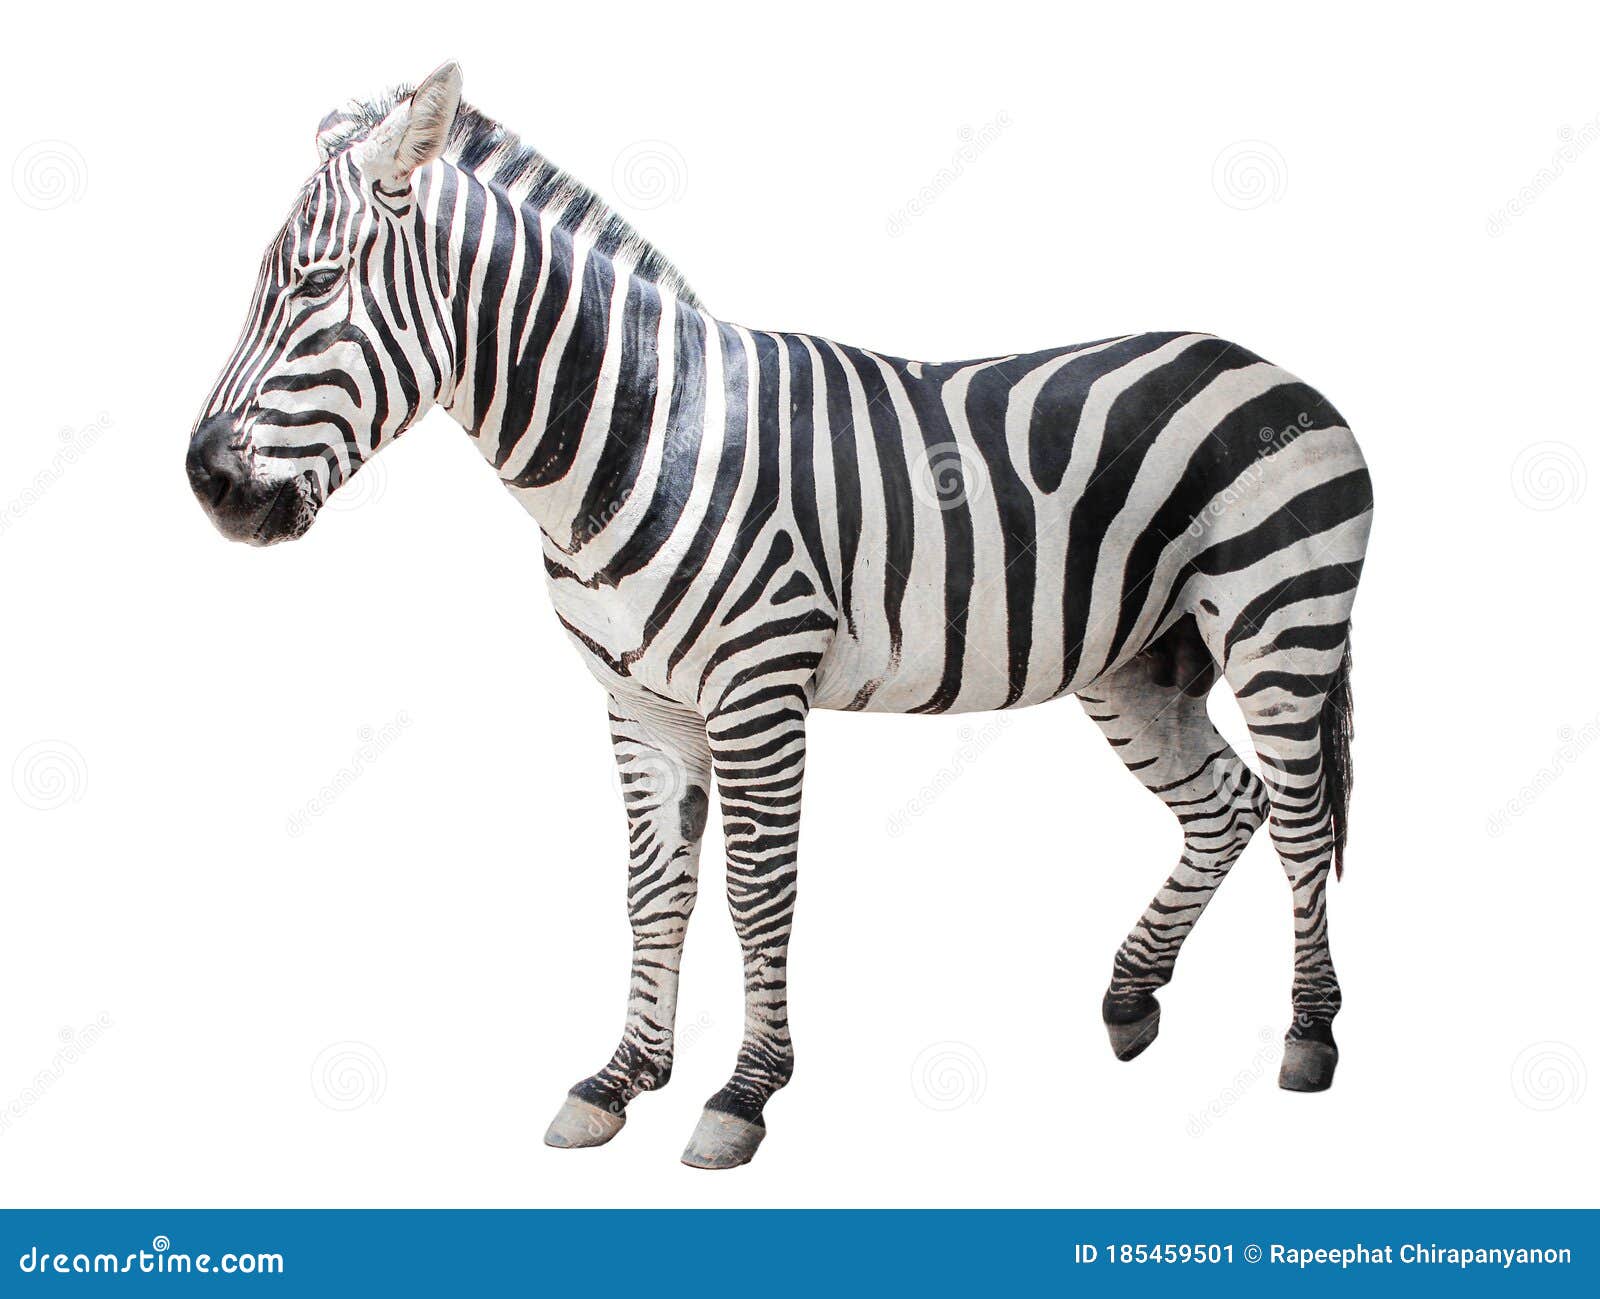 young beautiful close up zebra africa animal isolate stand on white background in zoo with full cutout length